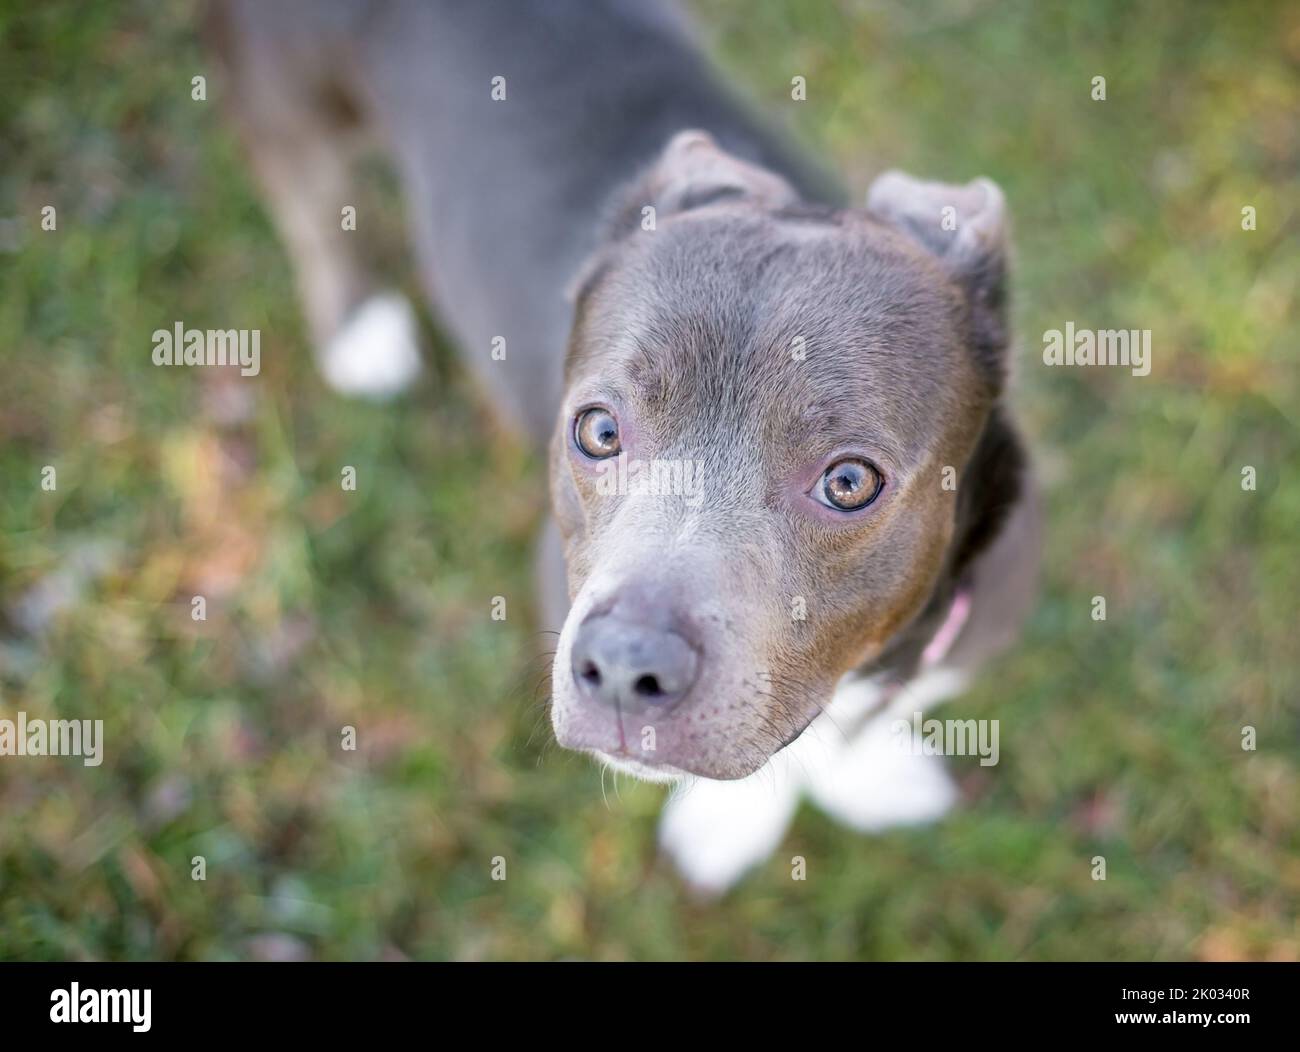 A cute gray Pit Bull Terrier mixed breed dog holding its ears back and looking up at the camera Stock Photo